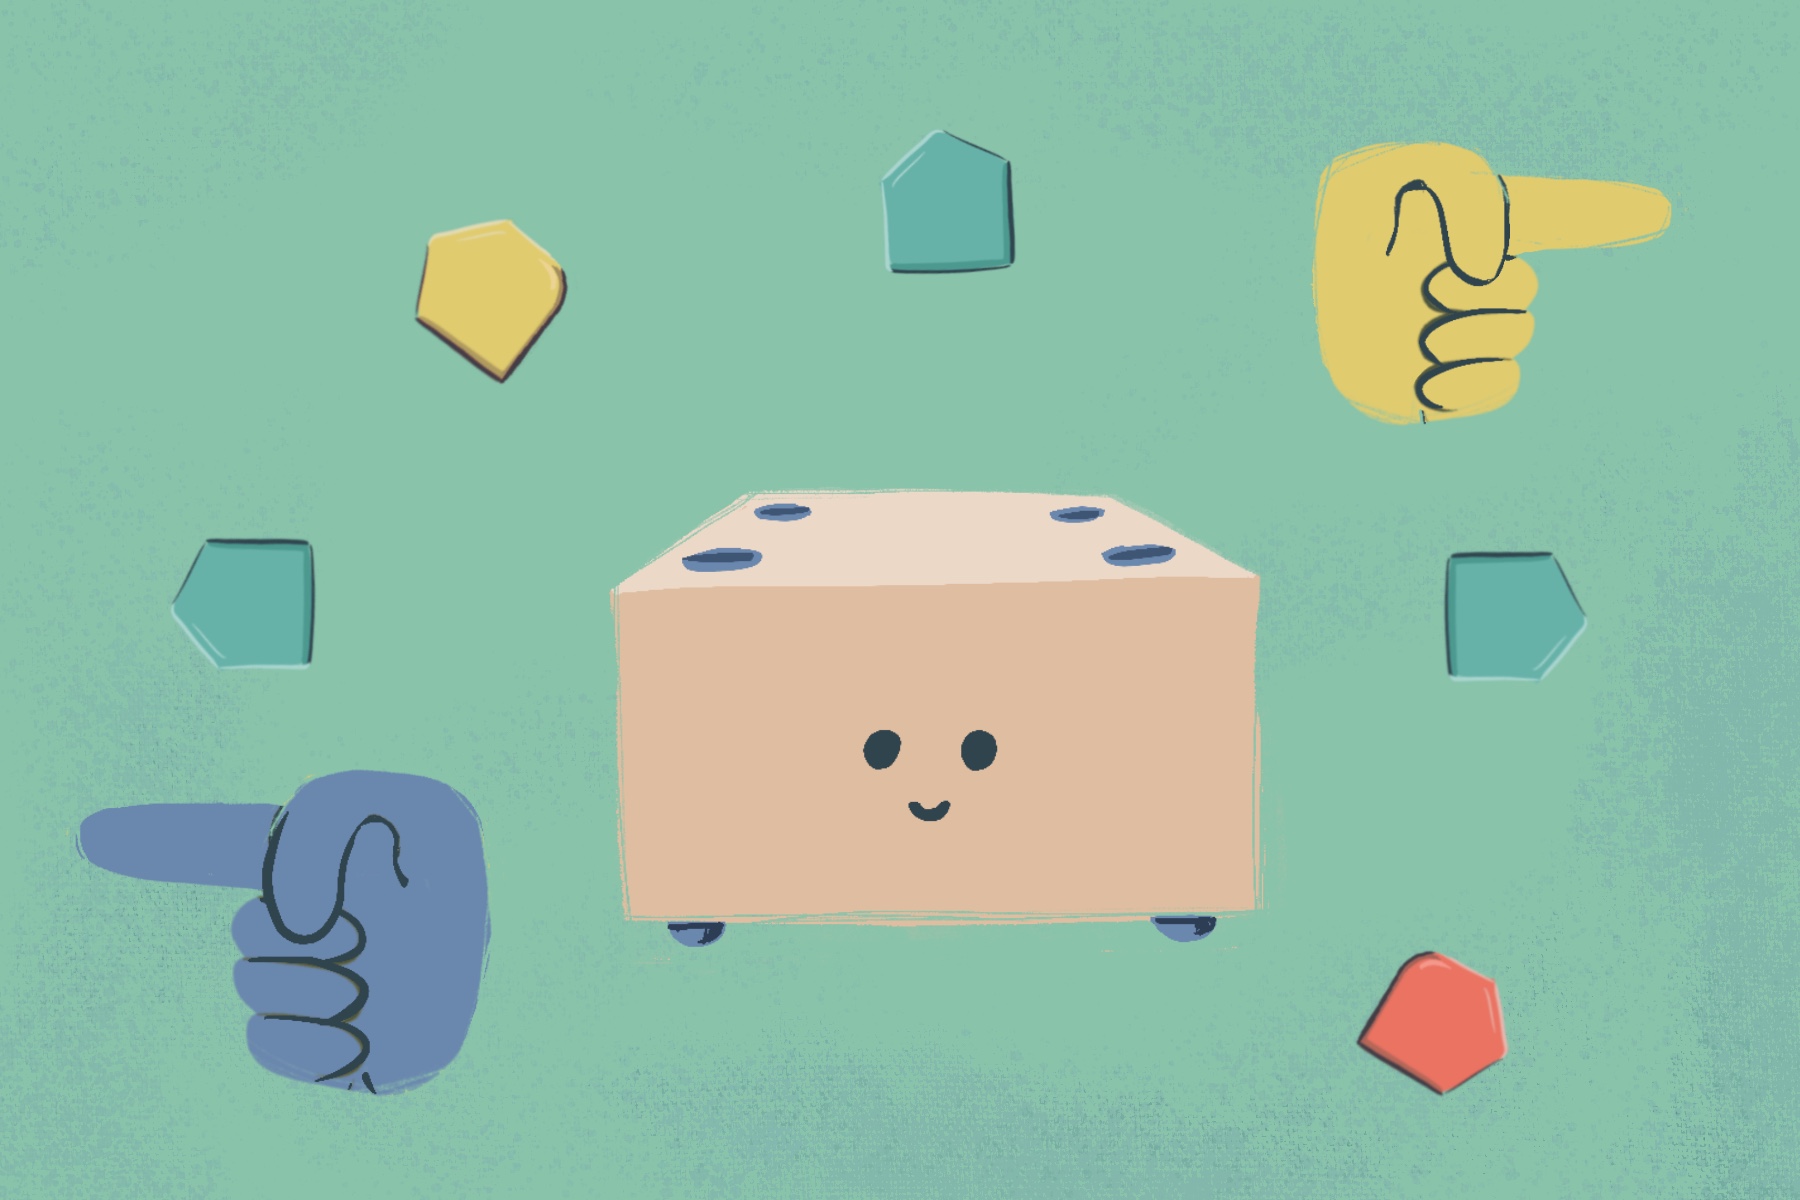 Illustration of Cubetto around command blocks, blue hand pointing left, and yellow hand pointing right